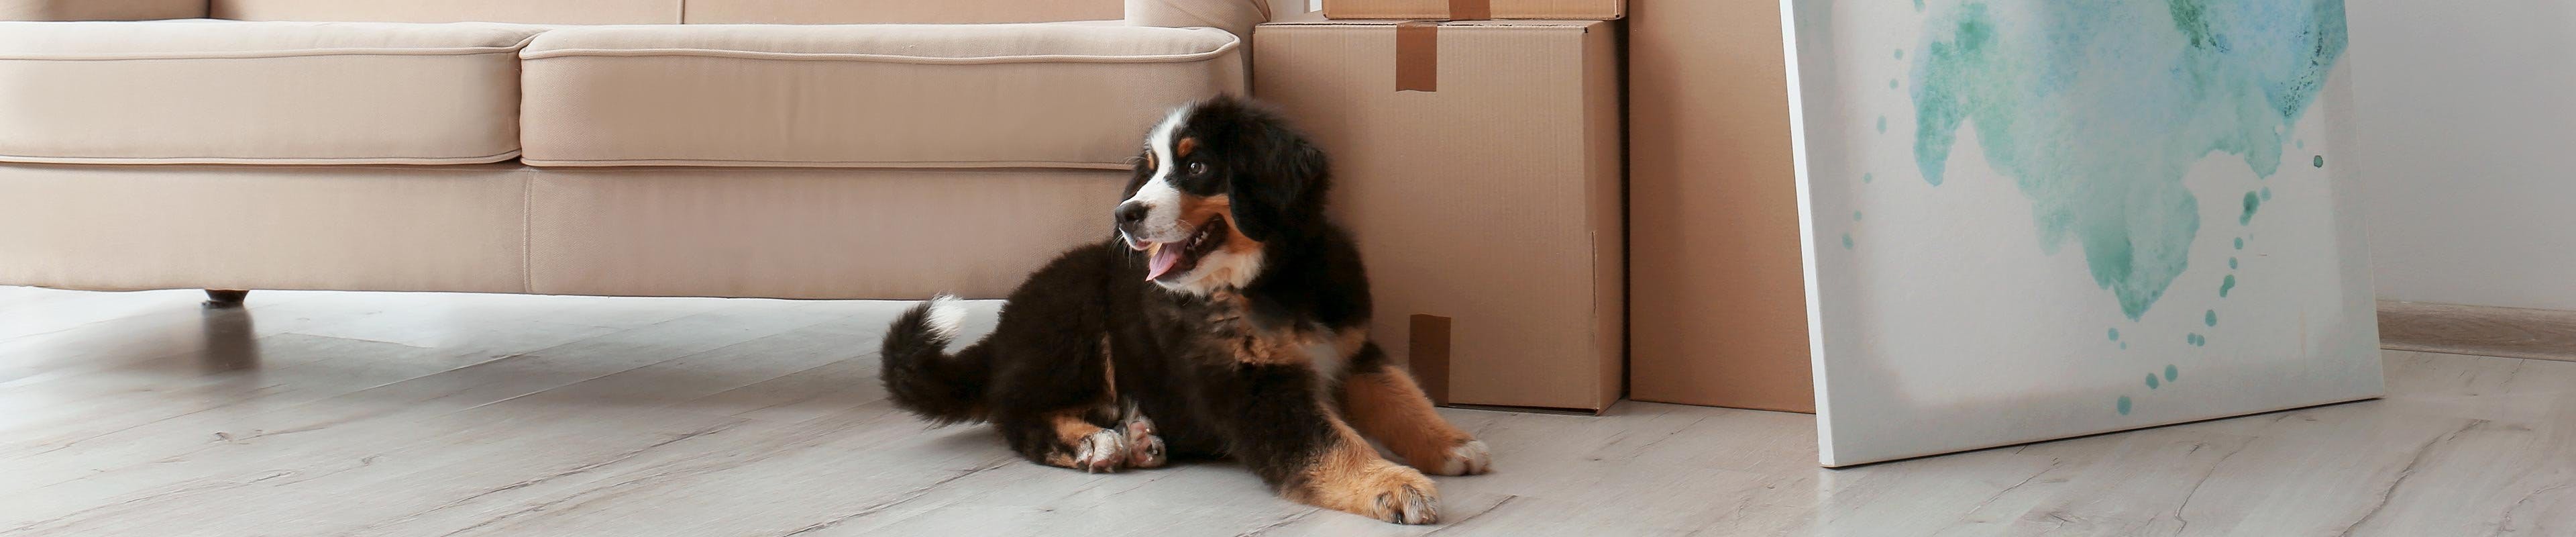 Image of a dog resting on a vinyl floor near a couch and moving boxes.